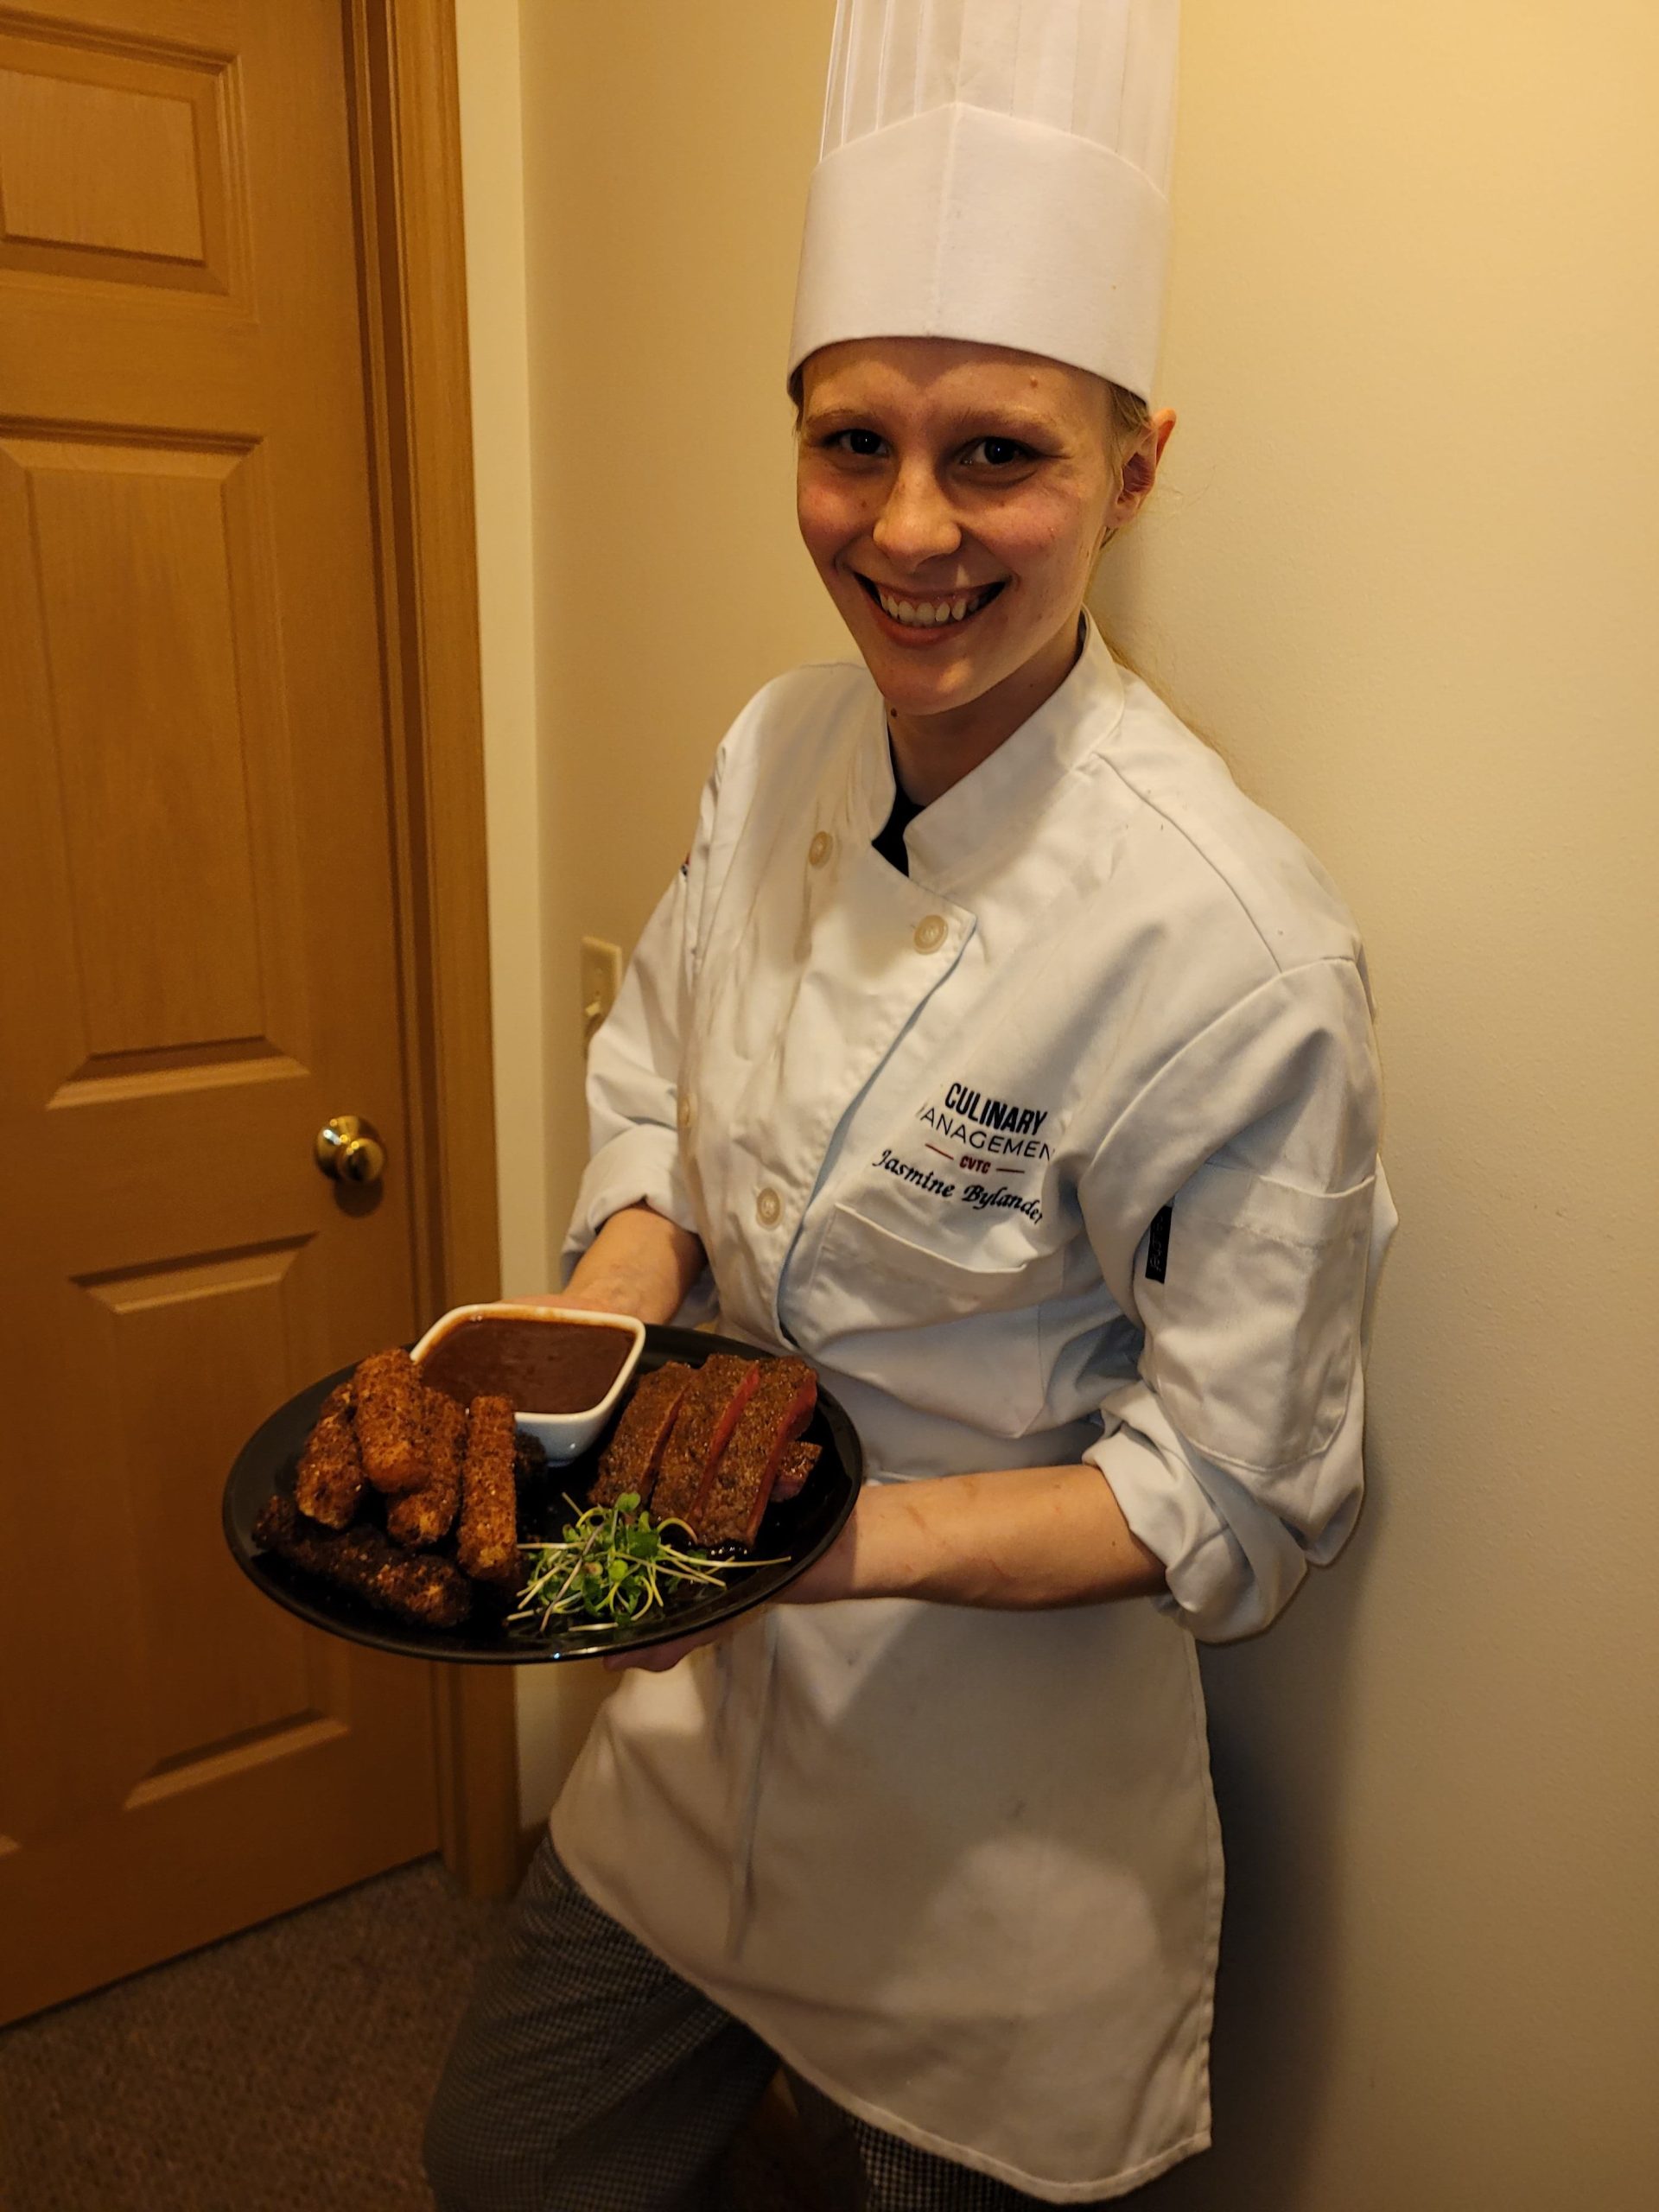 Jasmine Bylander stands in her chef coat with her competition entry, as the one of the peoples choice winners of the 2022 National Collegiate Veal Competition.